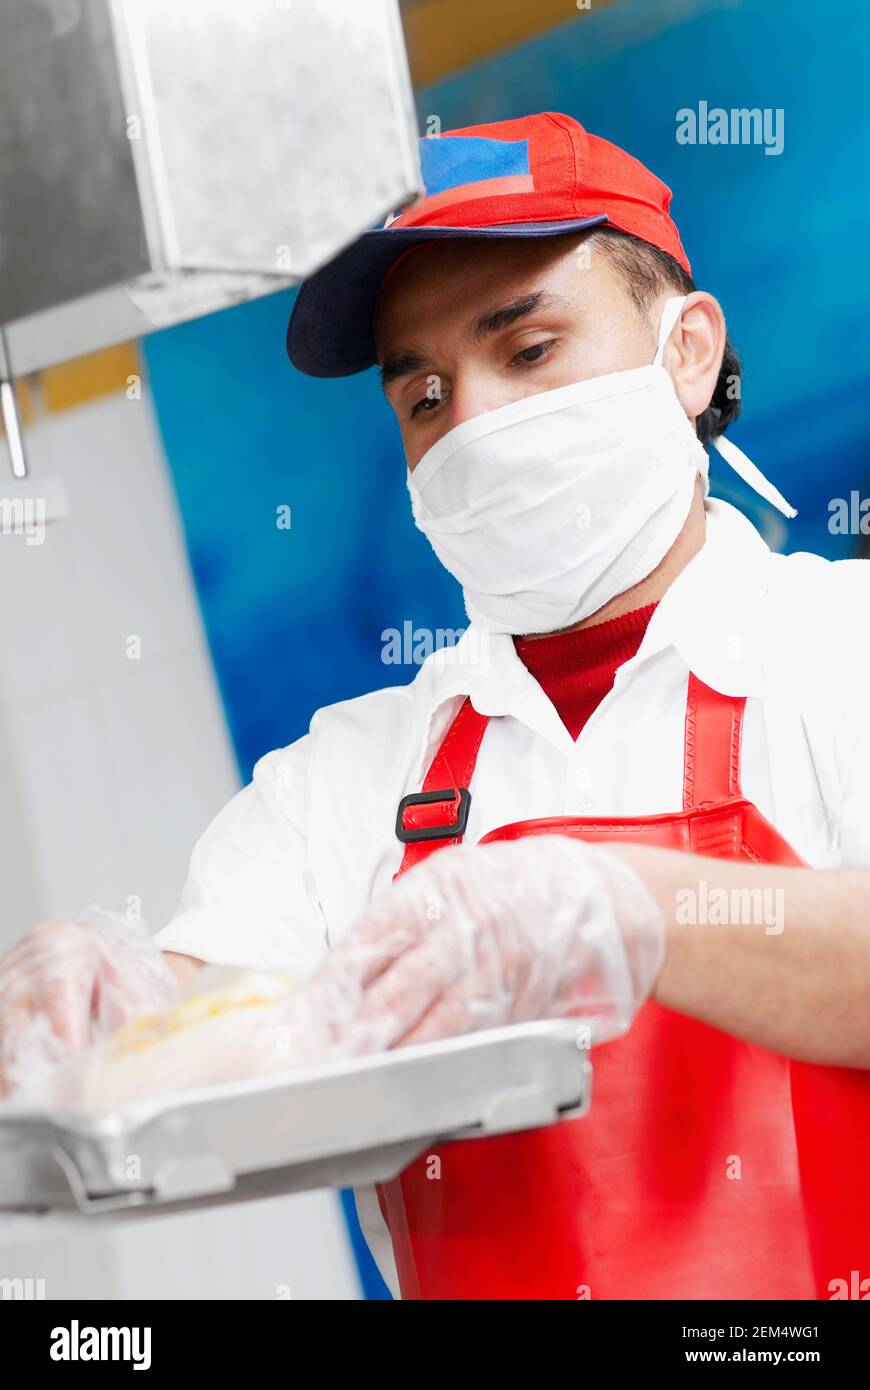 Close-up of a butcher weighing meat in a butcher shop Stock Photo